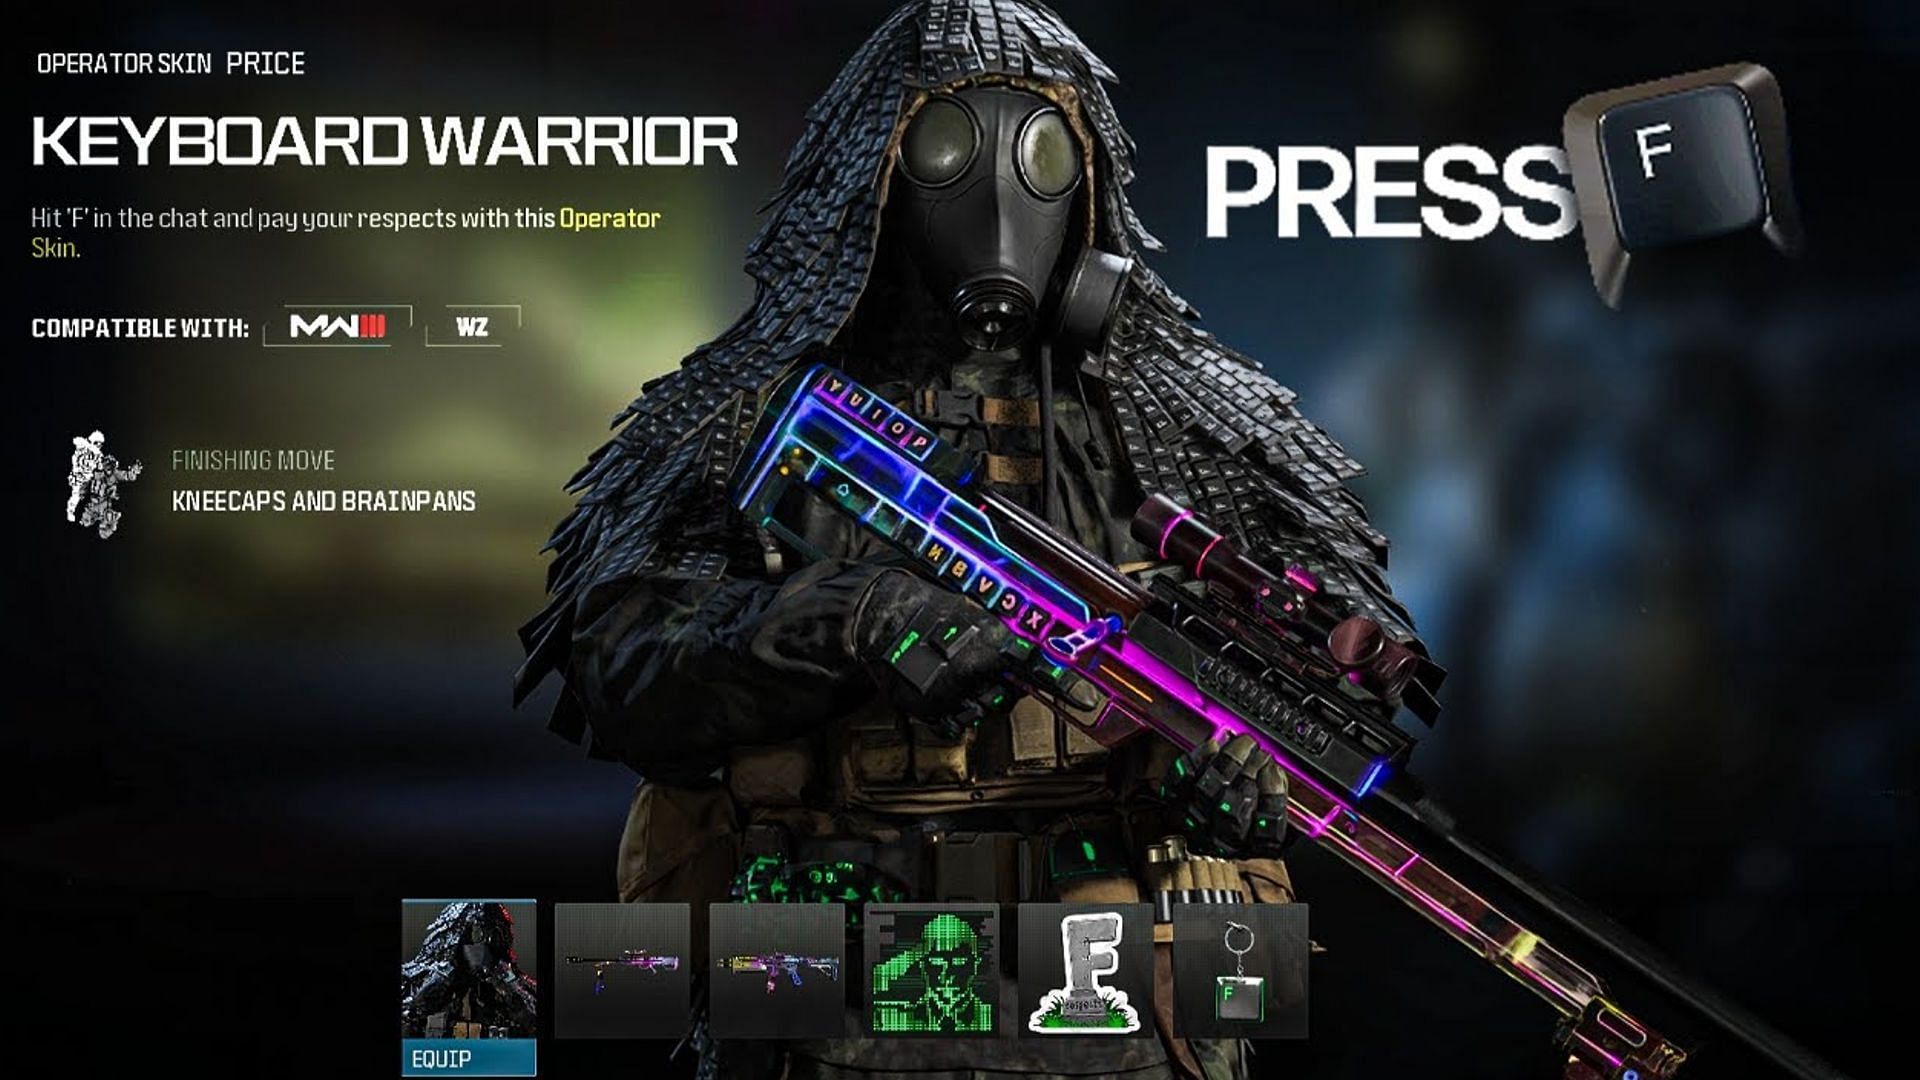 The price of the Press F bundle is 1800 COD points (image via Activision)